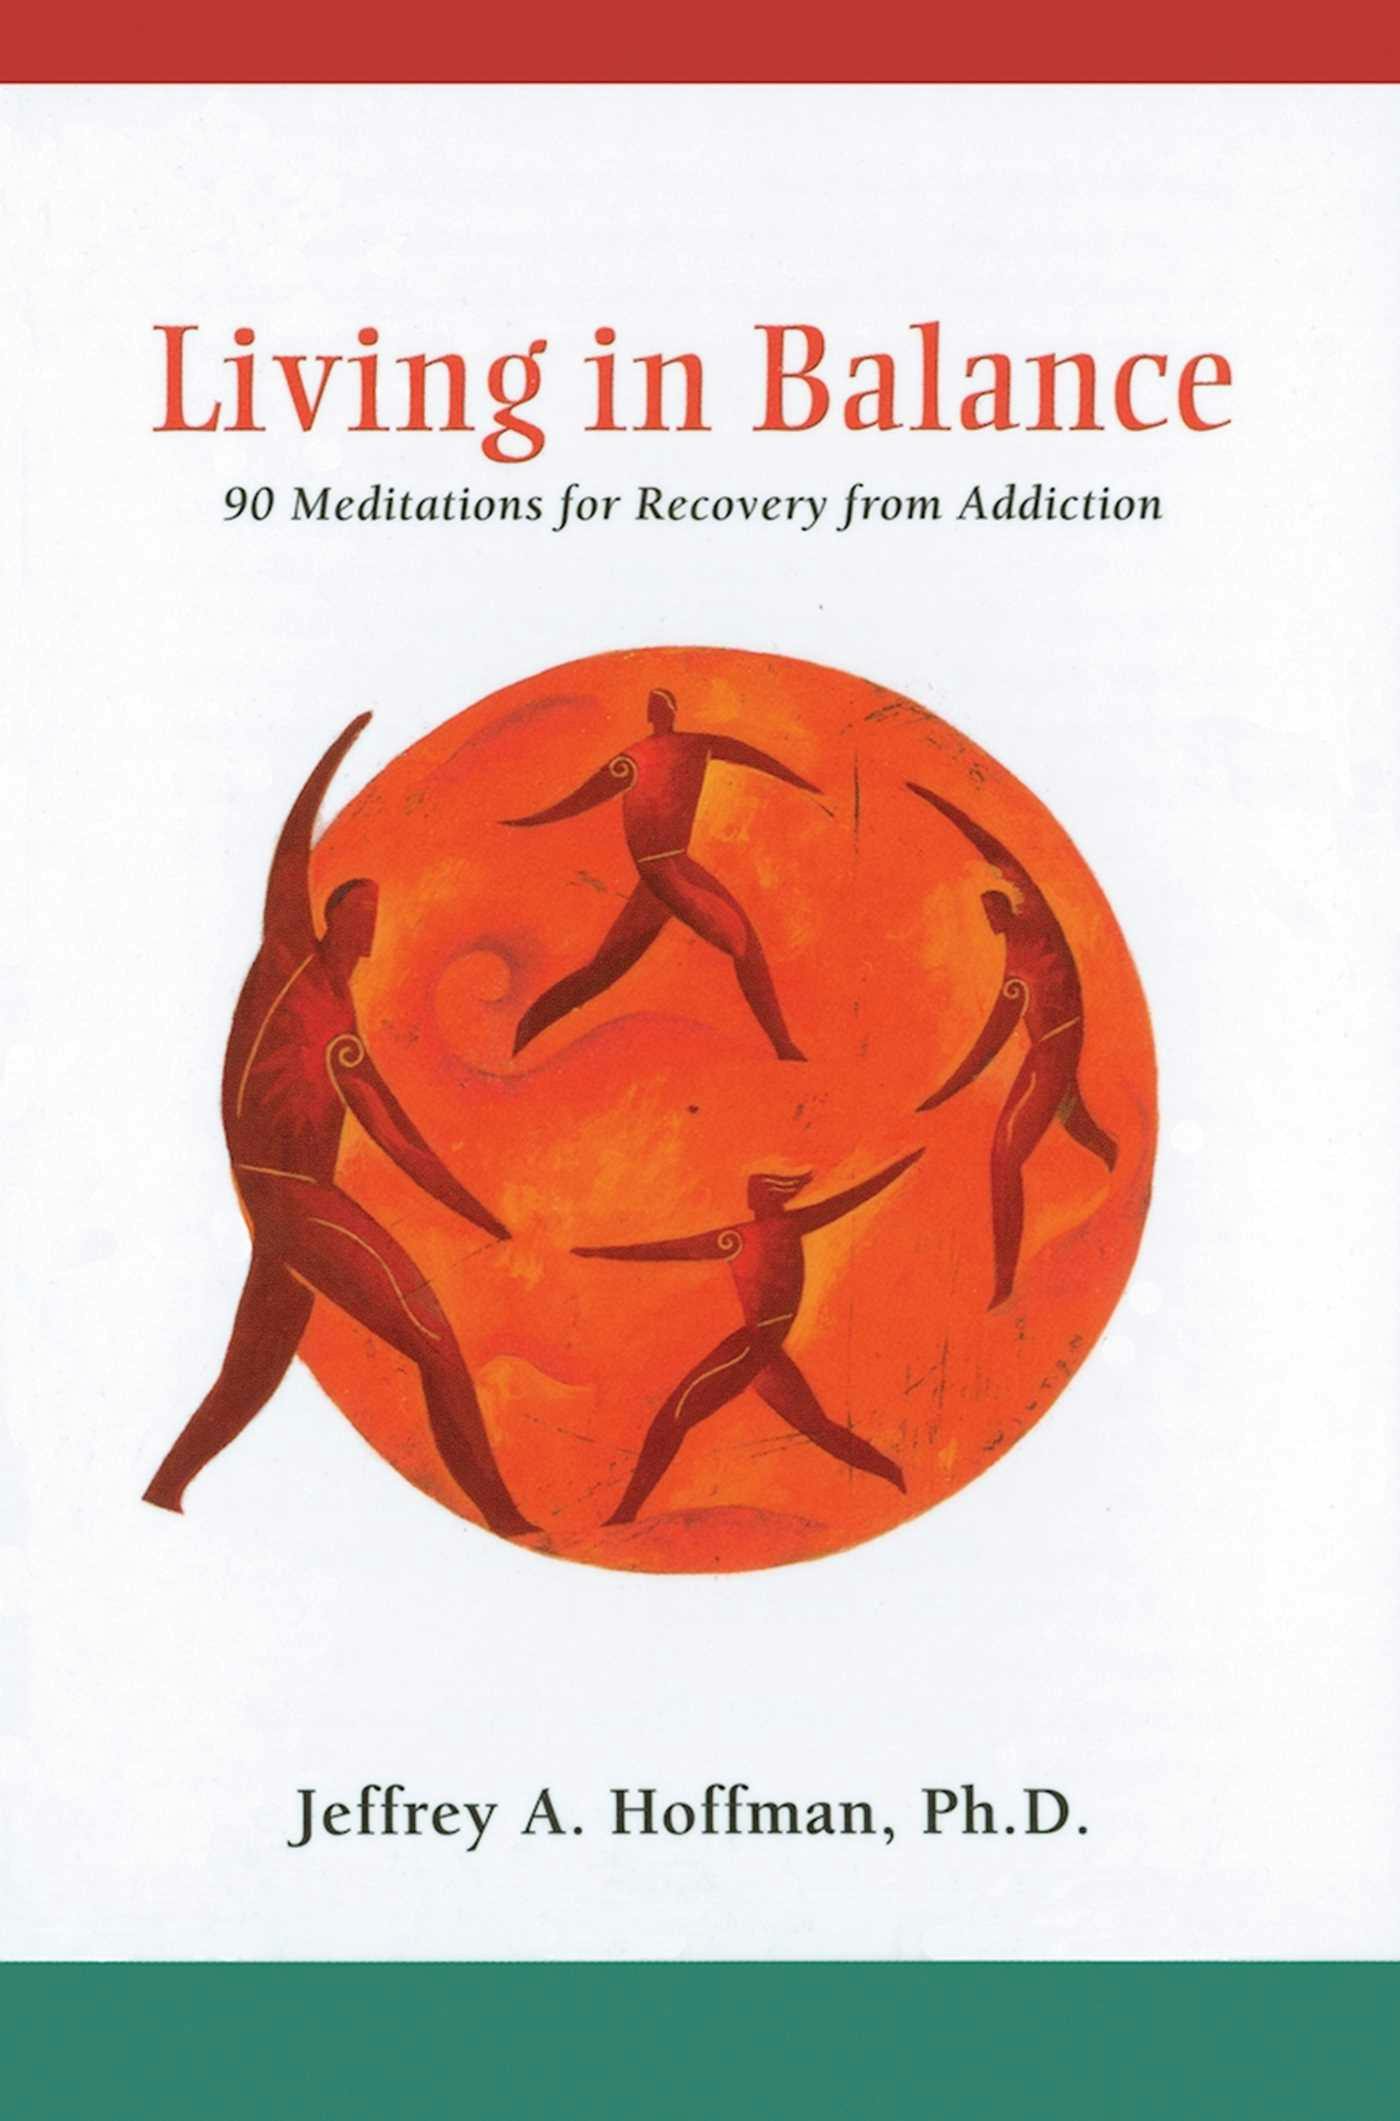 Living in Balance Meditations Book: 90 Meditations for Recovery from Addiction - Jeffrey A Hoffman